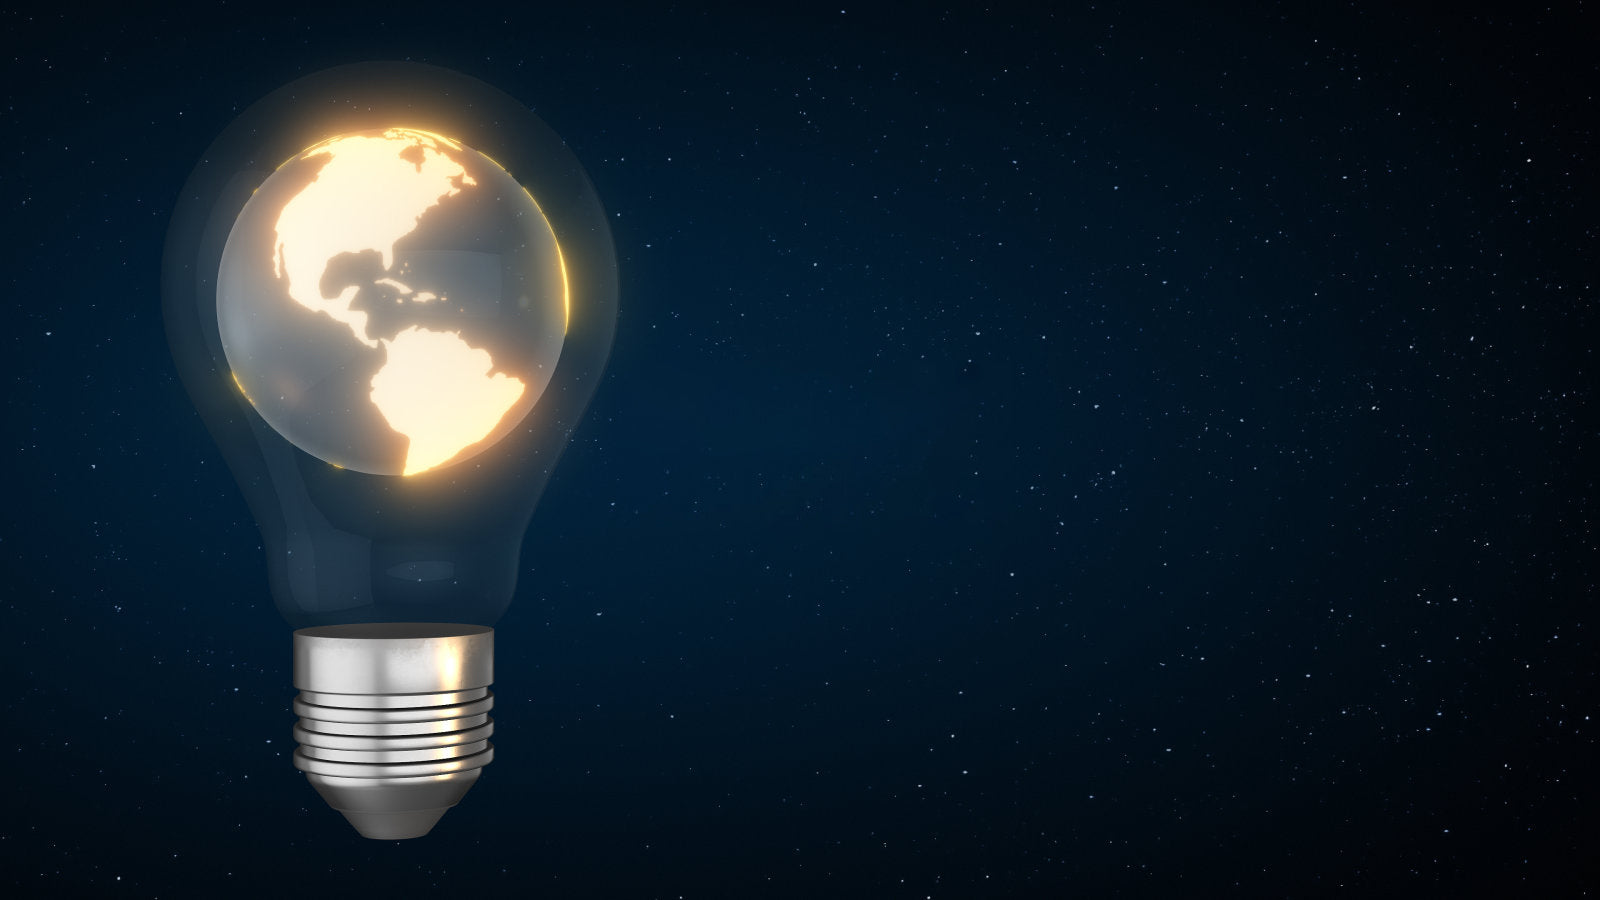 Guarding Our Planet Starts with Smart Lighting - A Special Insight for Earth Day